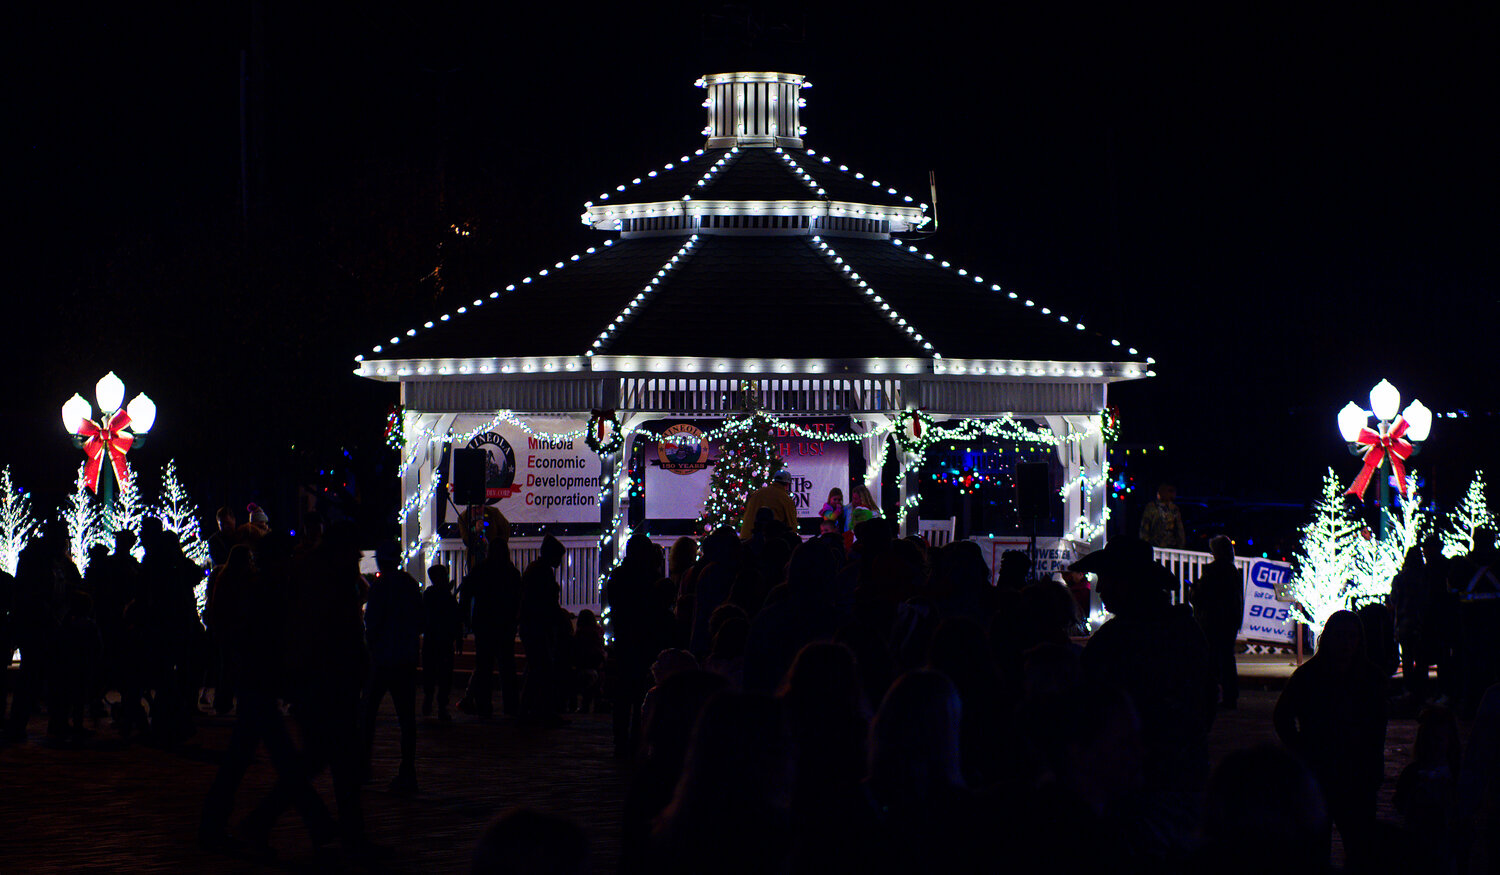 The gazebo was lit up brightly, in contrast to the surrounding downtown area. [more Mineola merriment]